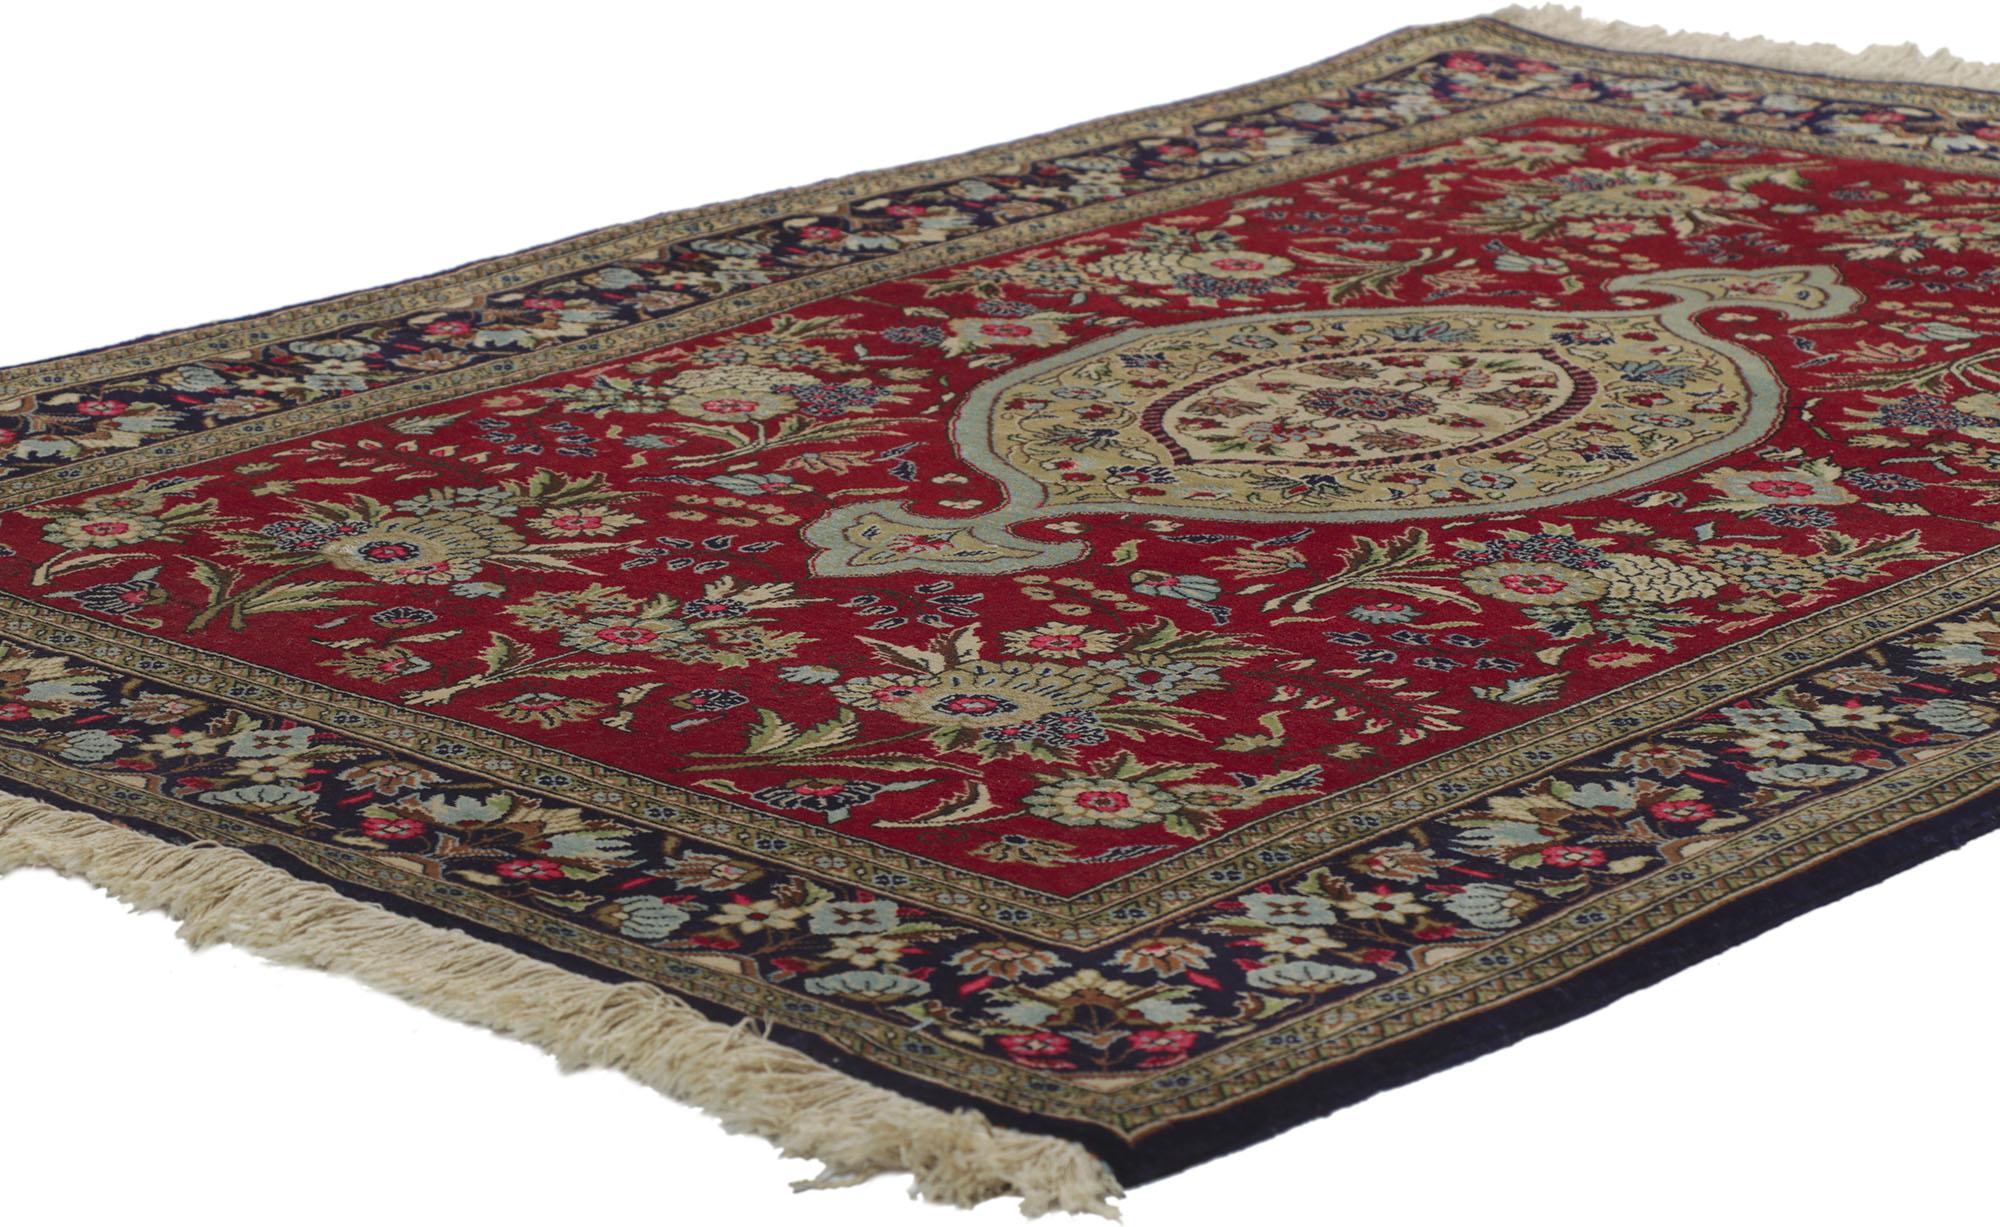 78220 Vintage Persian Qum Rug, 03'08 x 05'03.
Rendered in variegated shades of ruby red, navy blue, sky blue, brown, dark green, light green, taupe, rose, tan, pink, sand, and beige with other accent colors. Desirable Age Wear. Abrash. Hand-knotted